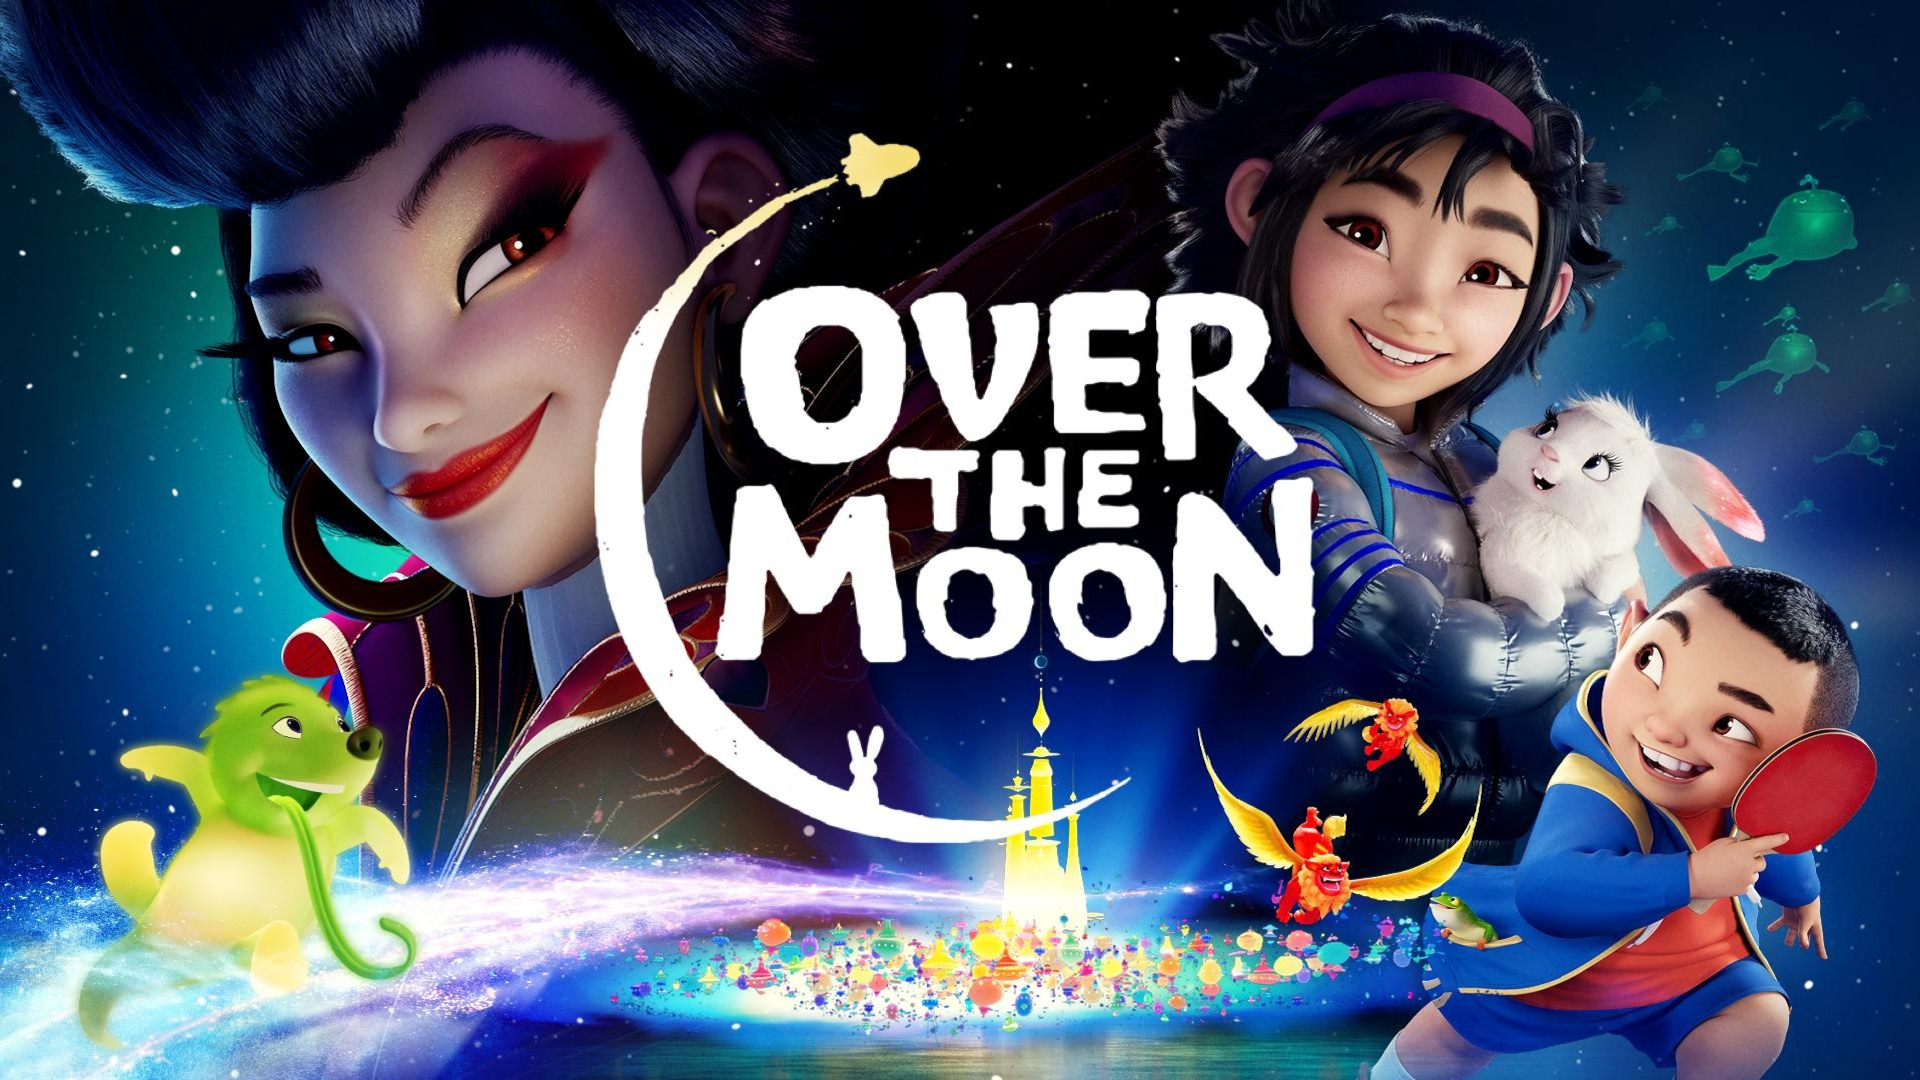 Movie Over the Moon HD Wallpaper